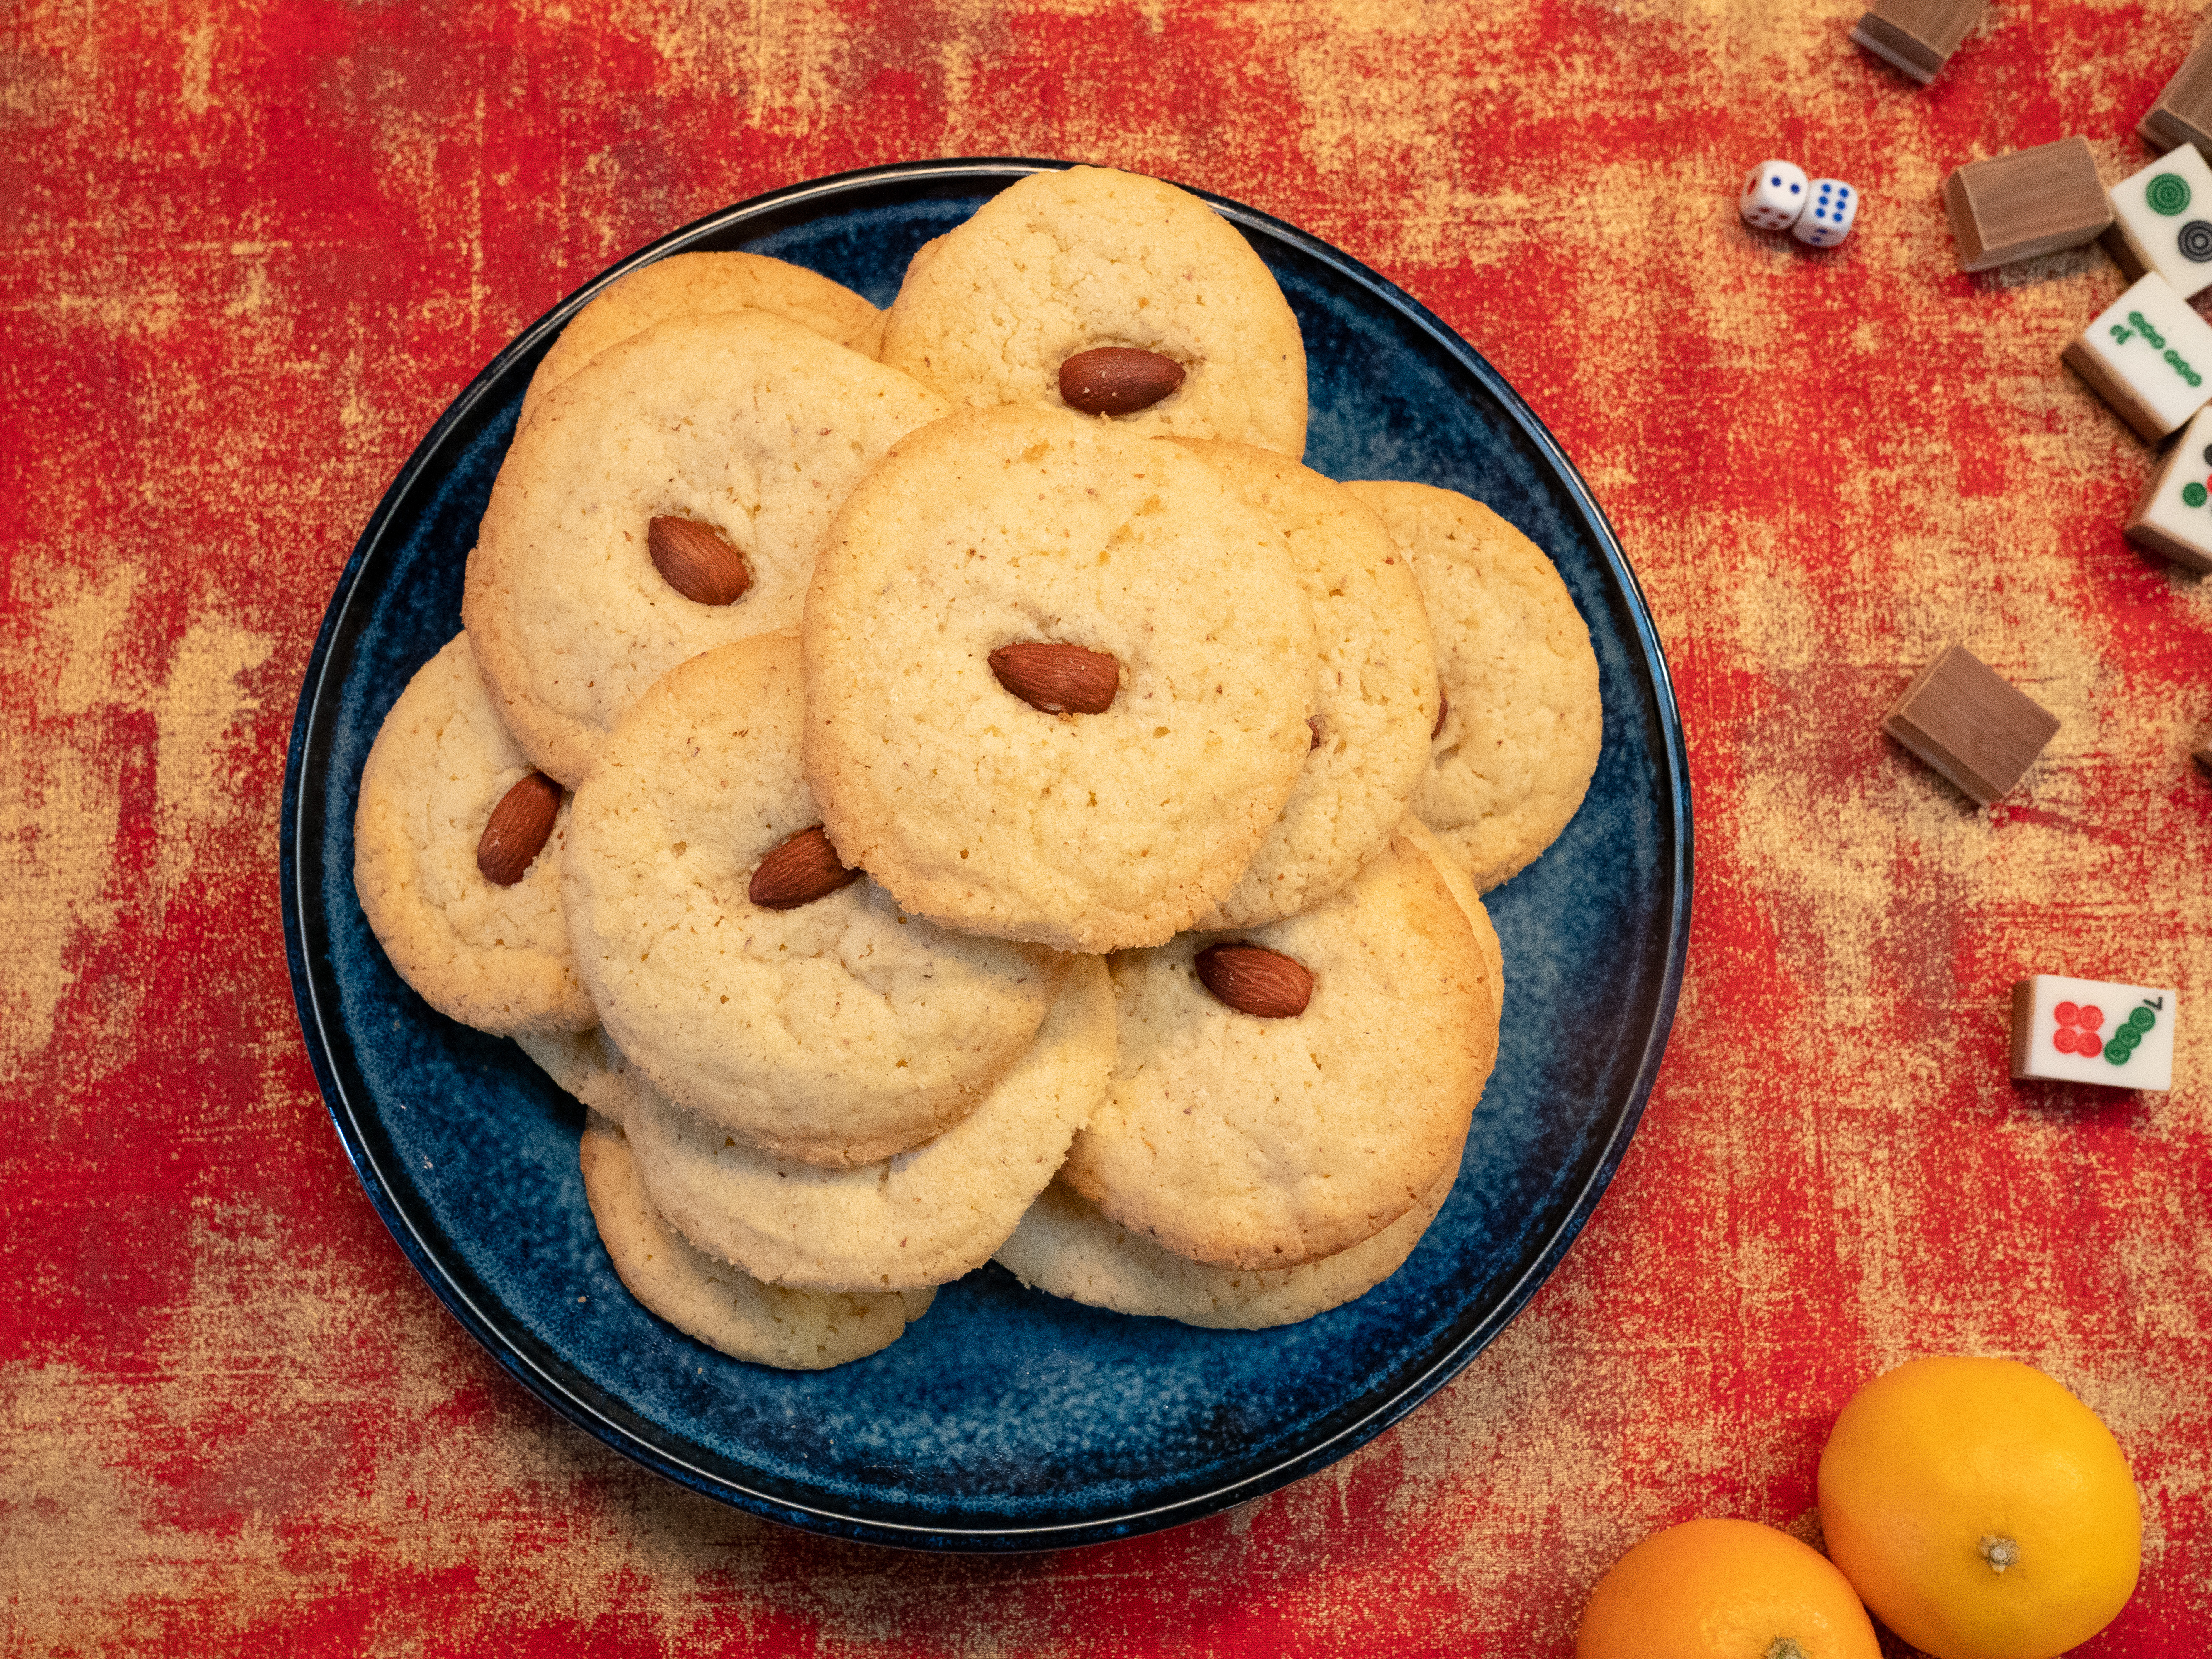 Orange Almond Cookies - The Whole Cook